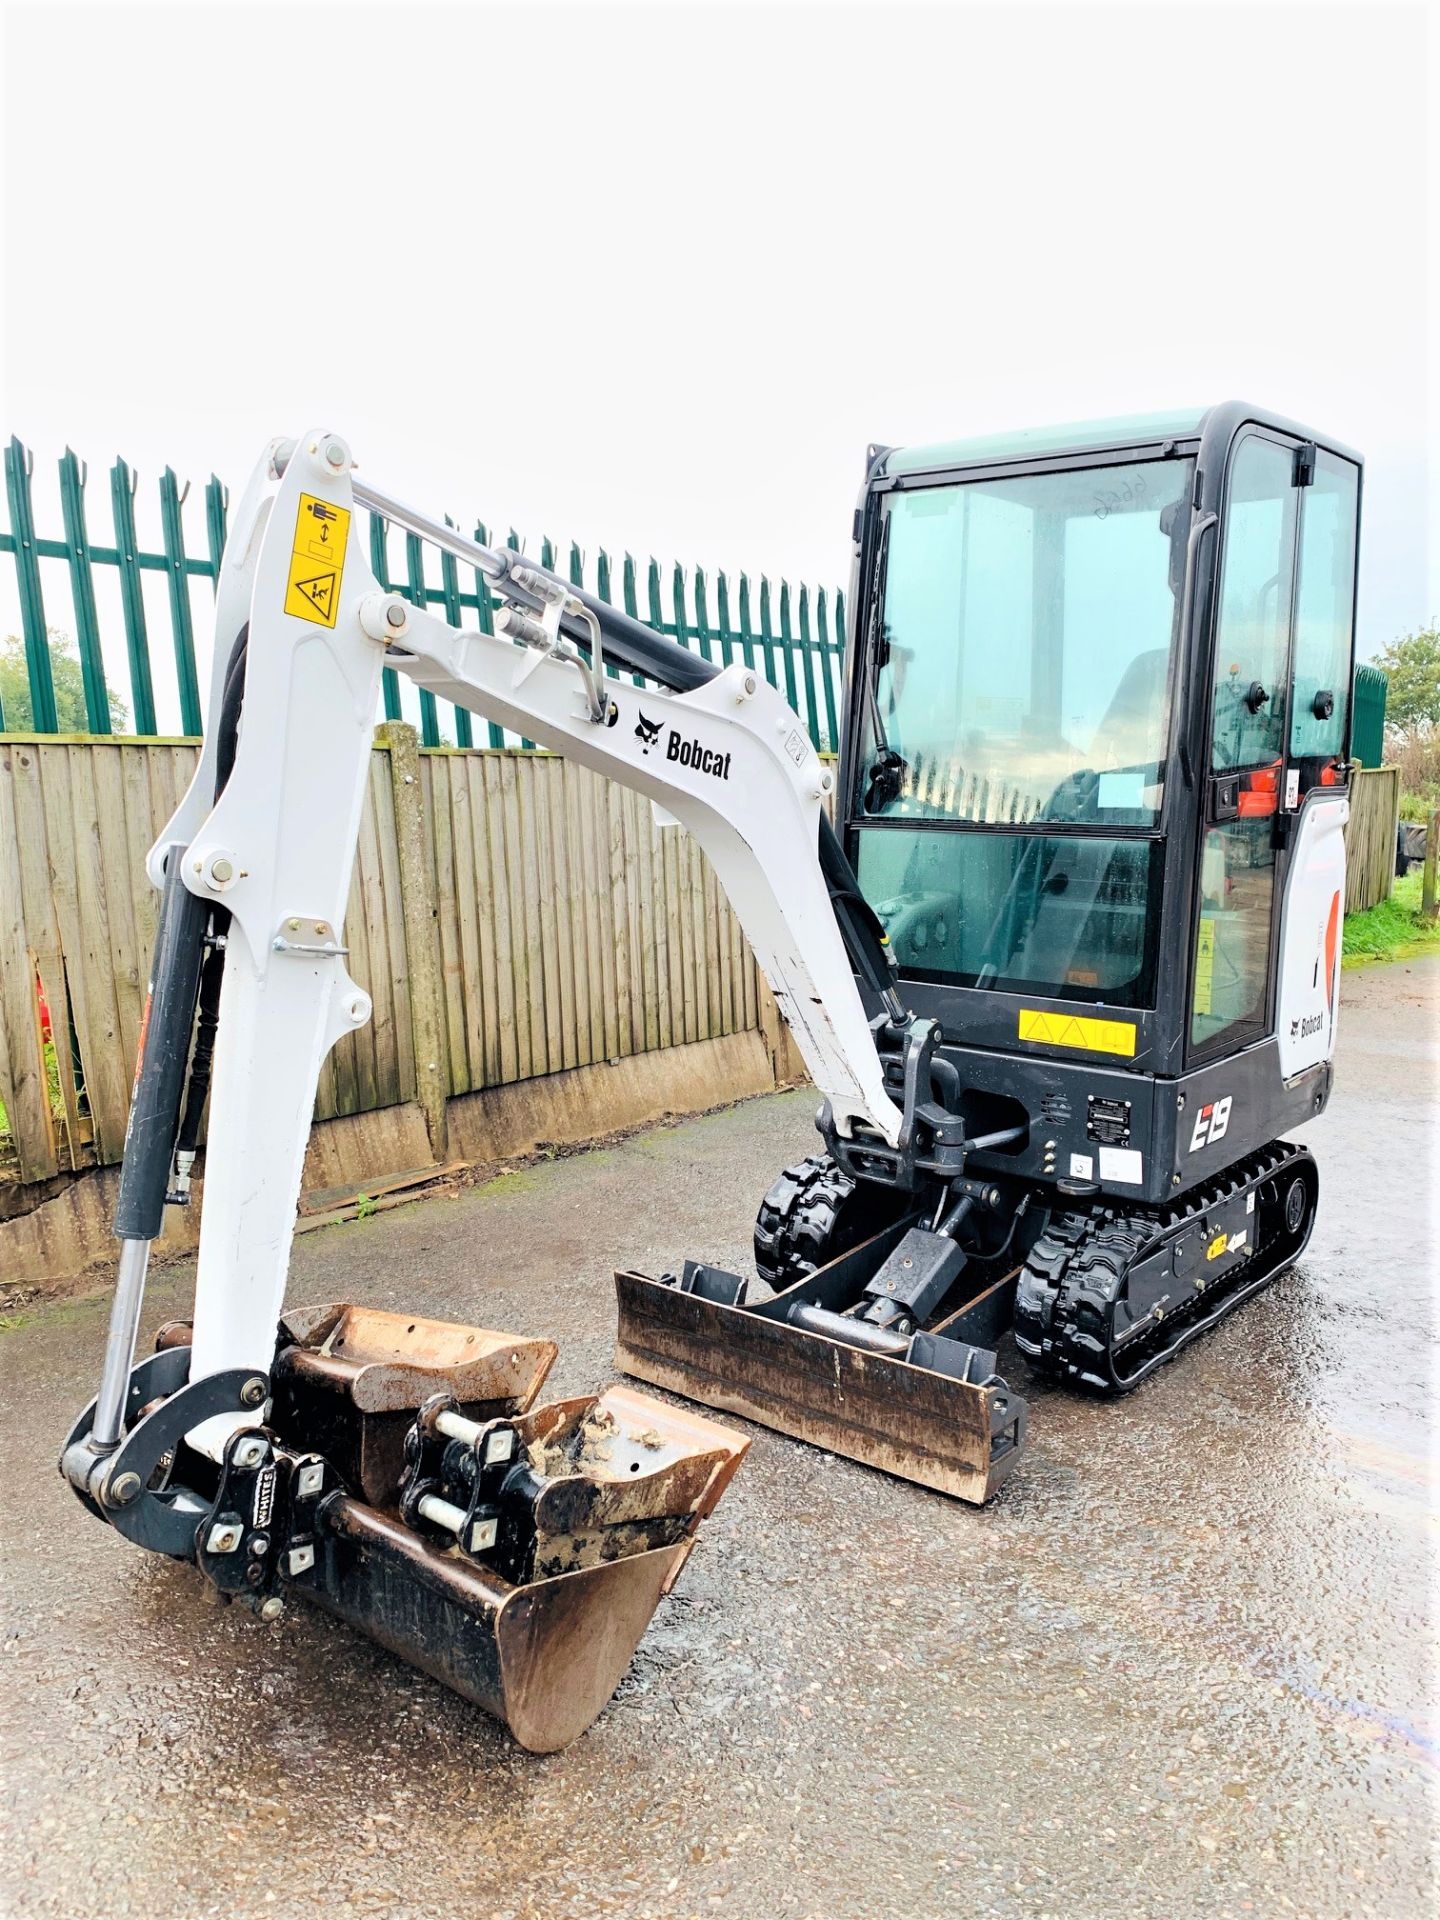 BOBCAT E19 RUBBER TRACKED CRAWLER DIGGER / EXCAVATOR, YEAR 2019, 3 X BUCKETS, 2 SPEED TRACKING - Image 2 of 10